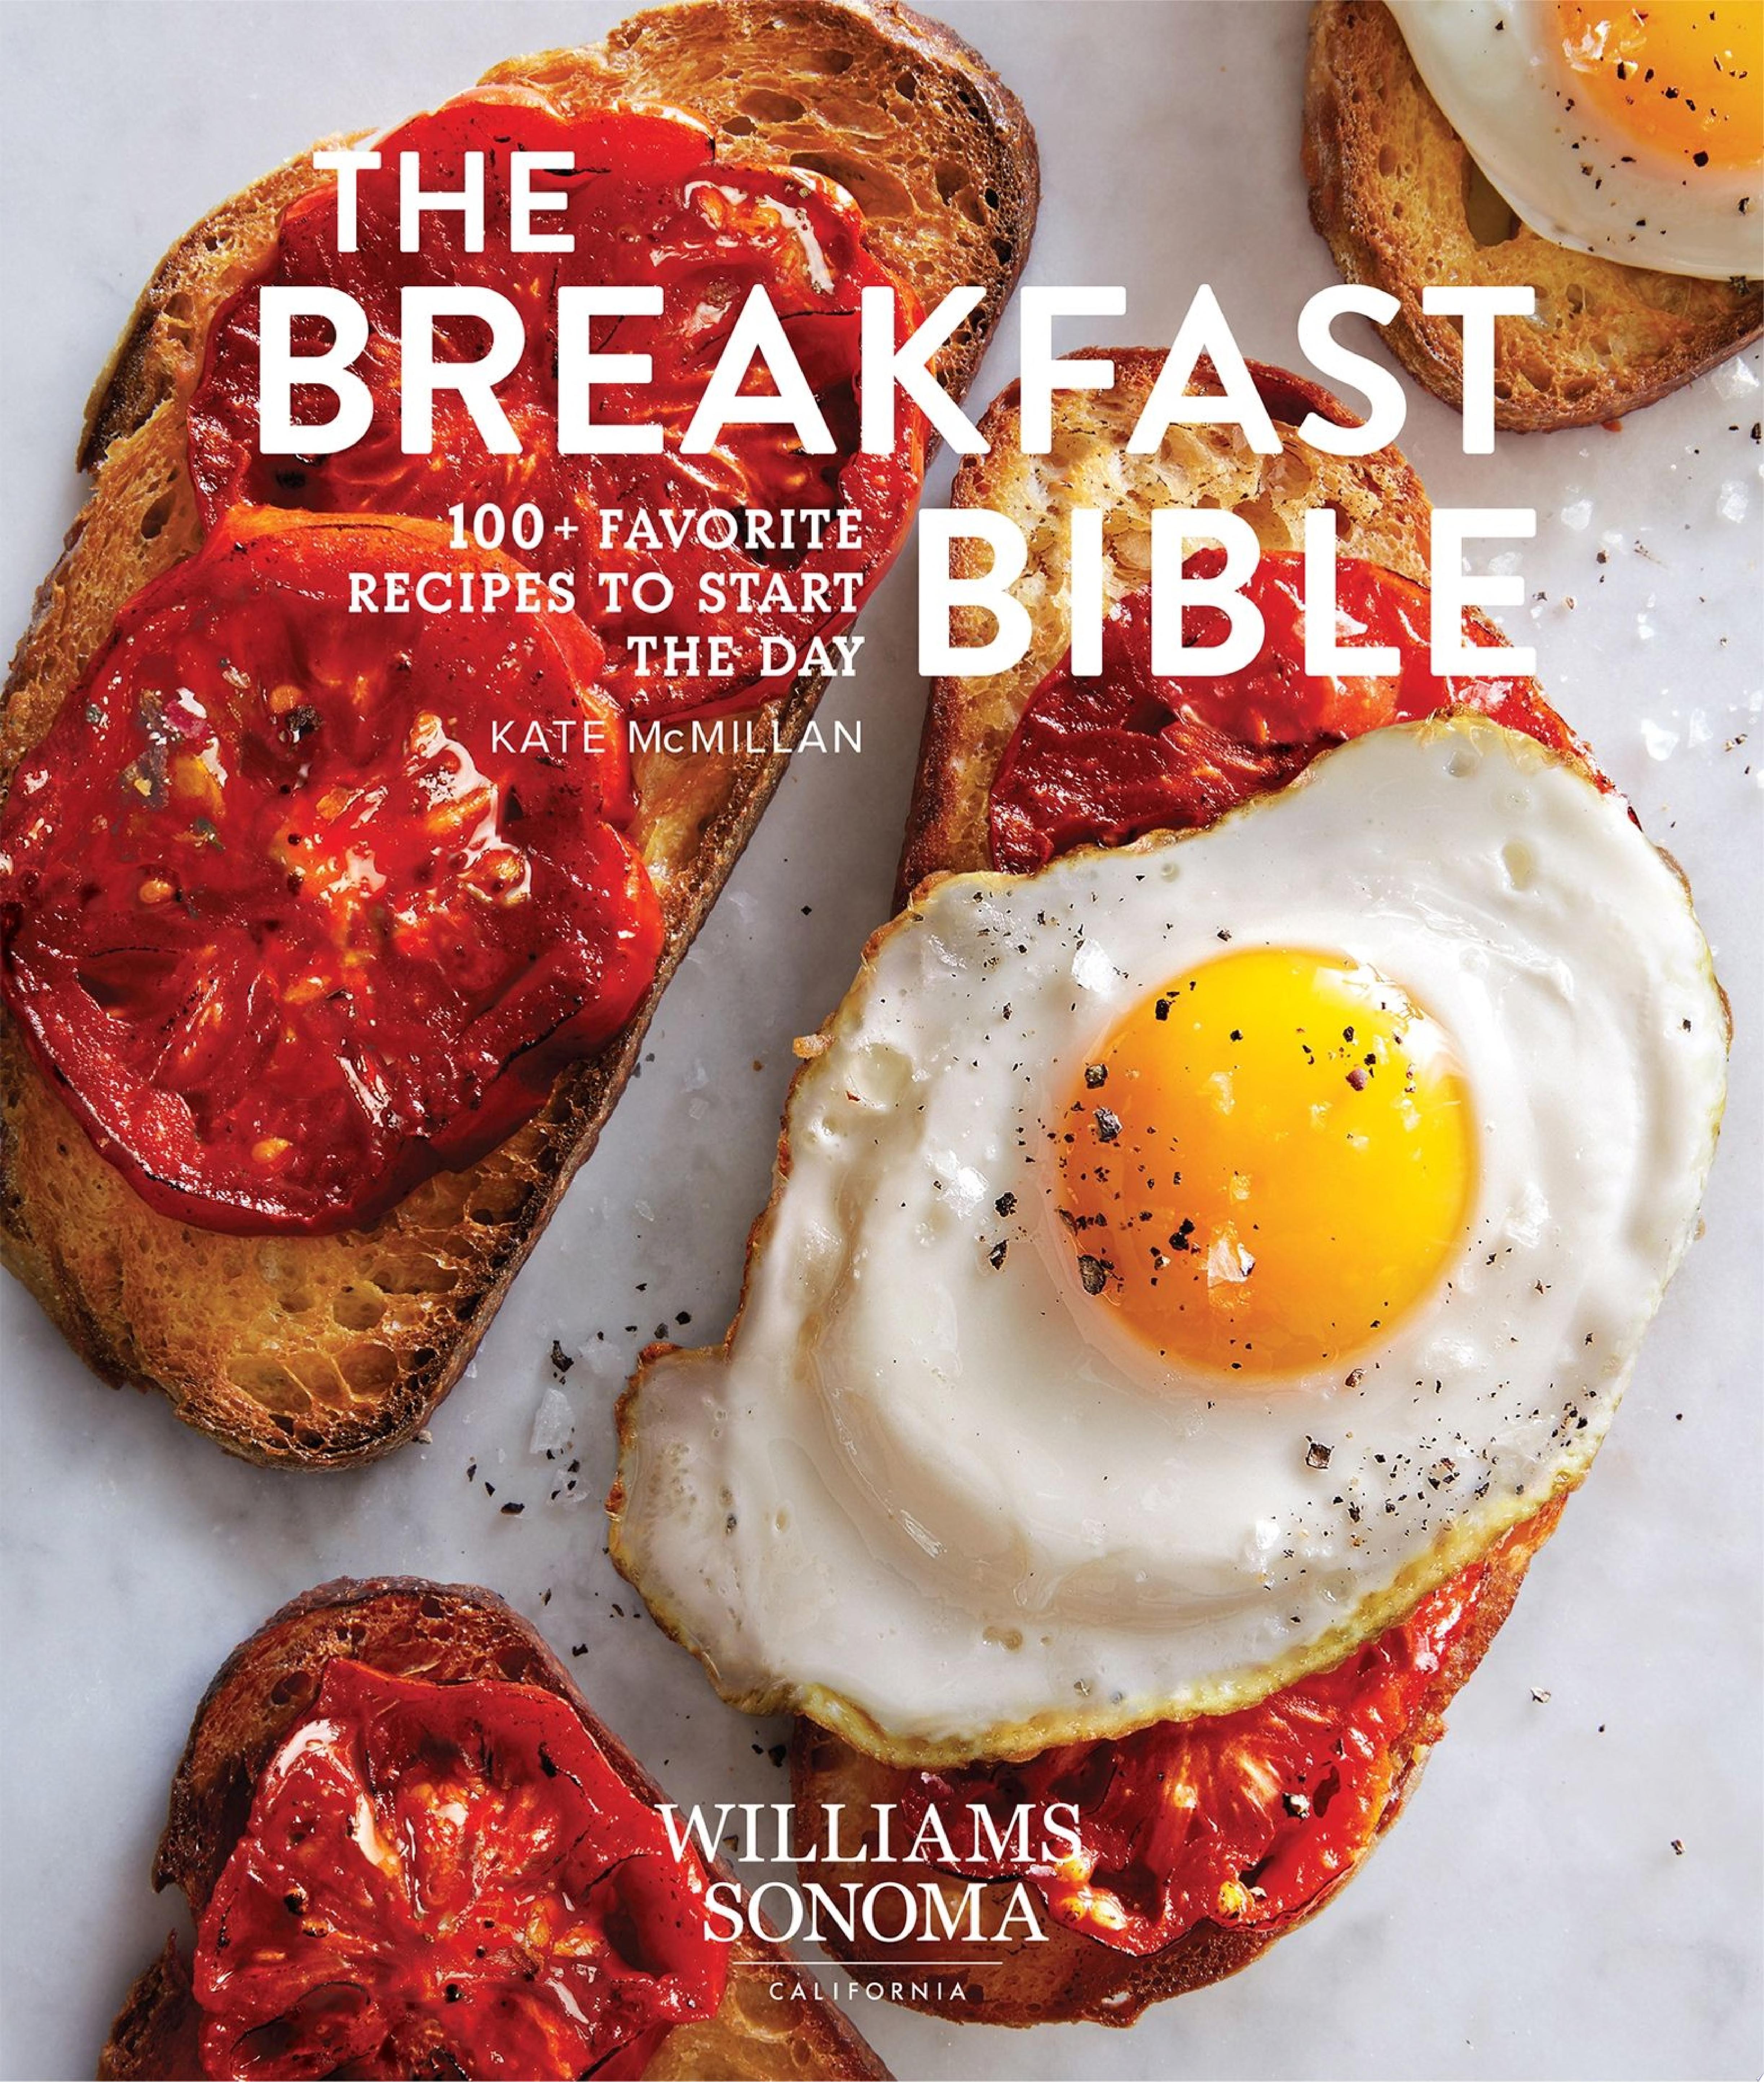 Image for "The Breakfast Bible"